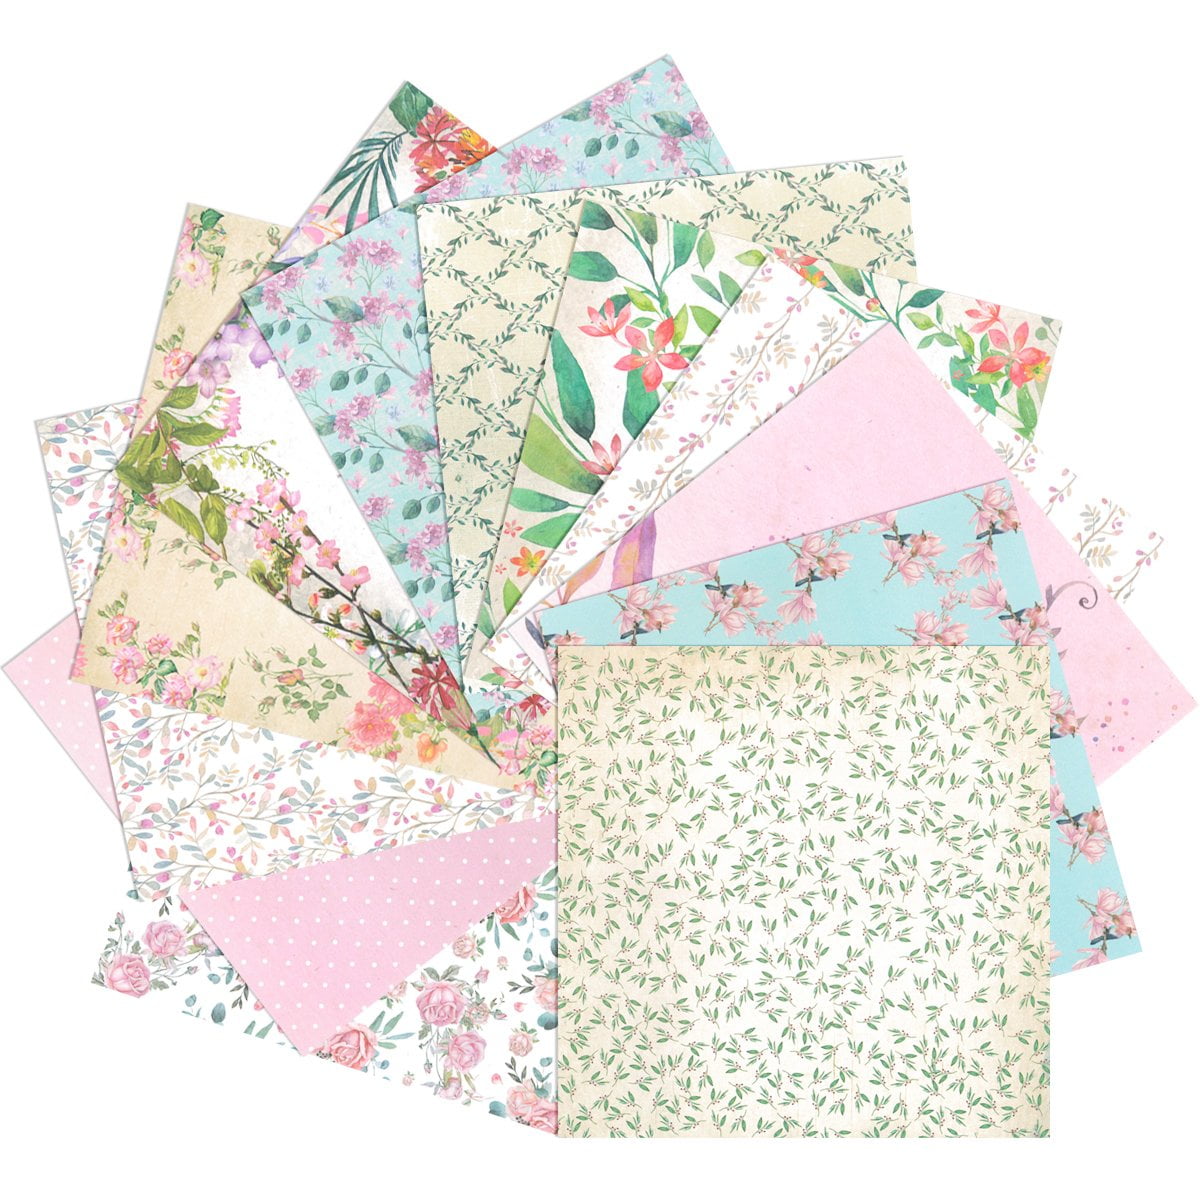 Floral Fantasies Decorative Paper For Scrapbooking: Paper Craft Supplies  For Scrapbooking, Decoupage, Origami, Journaling & Gift Wrapping  (Decorative Paper For Papercrafting): Papery, GenJoLei: : Books